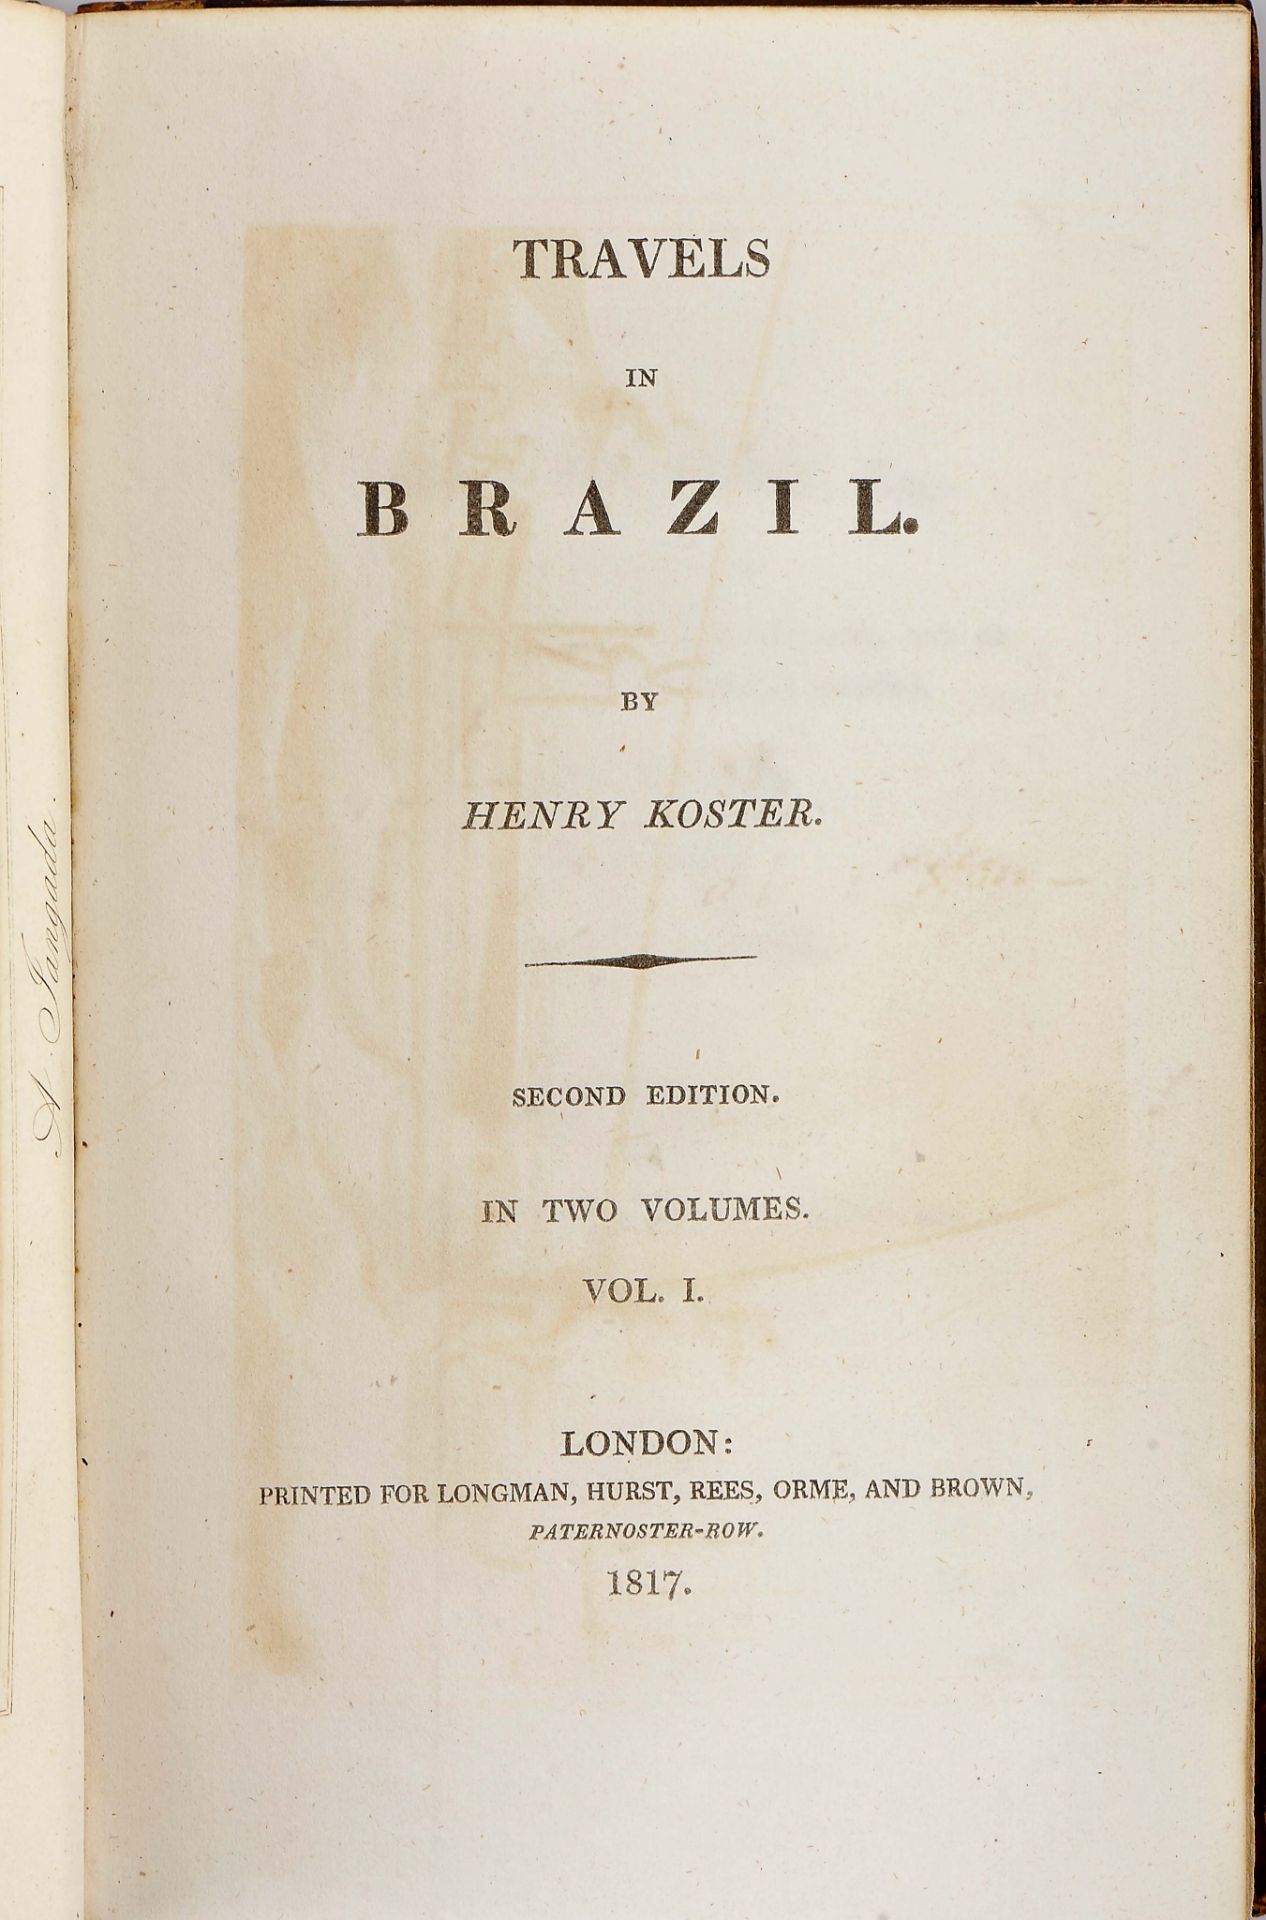 KOSTER, Henry.- Travels in Brazil.- Second edition.- London: Longman, Hurst, Rees, Orme and Brown, 1